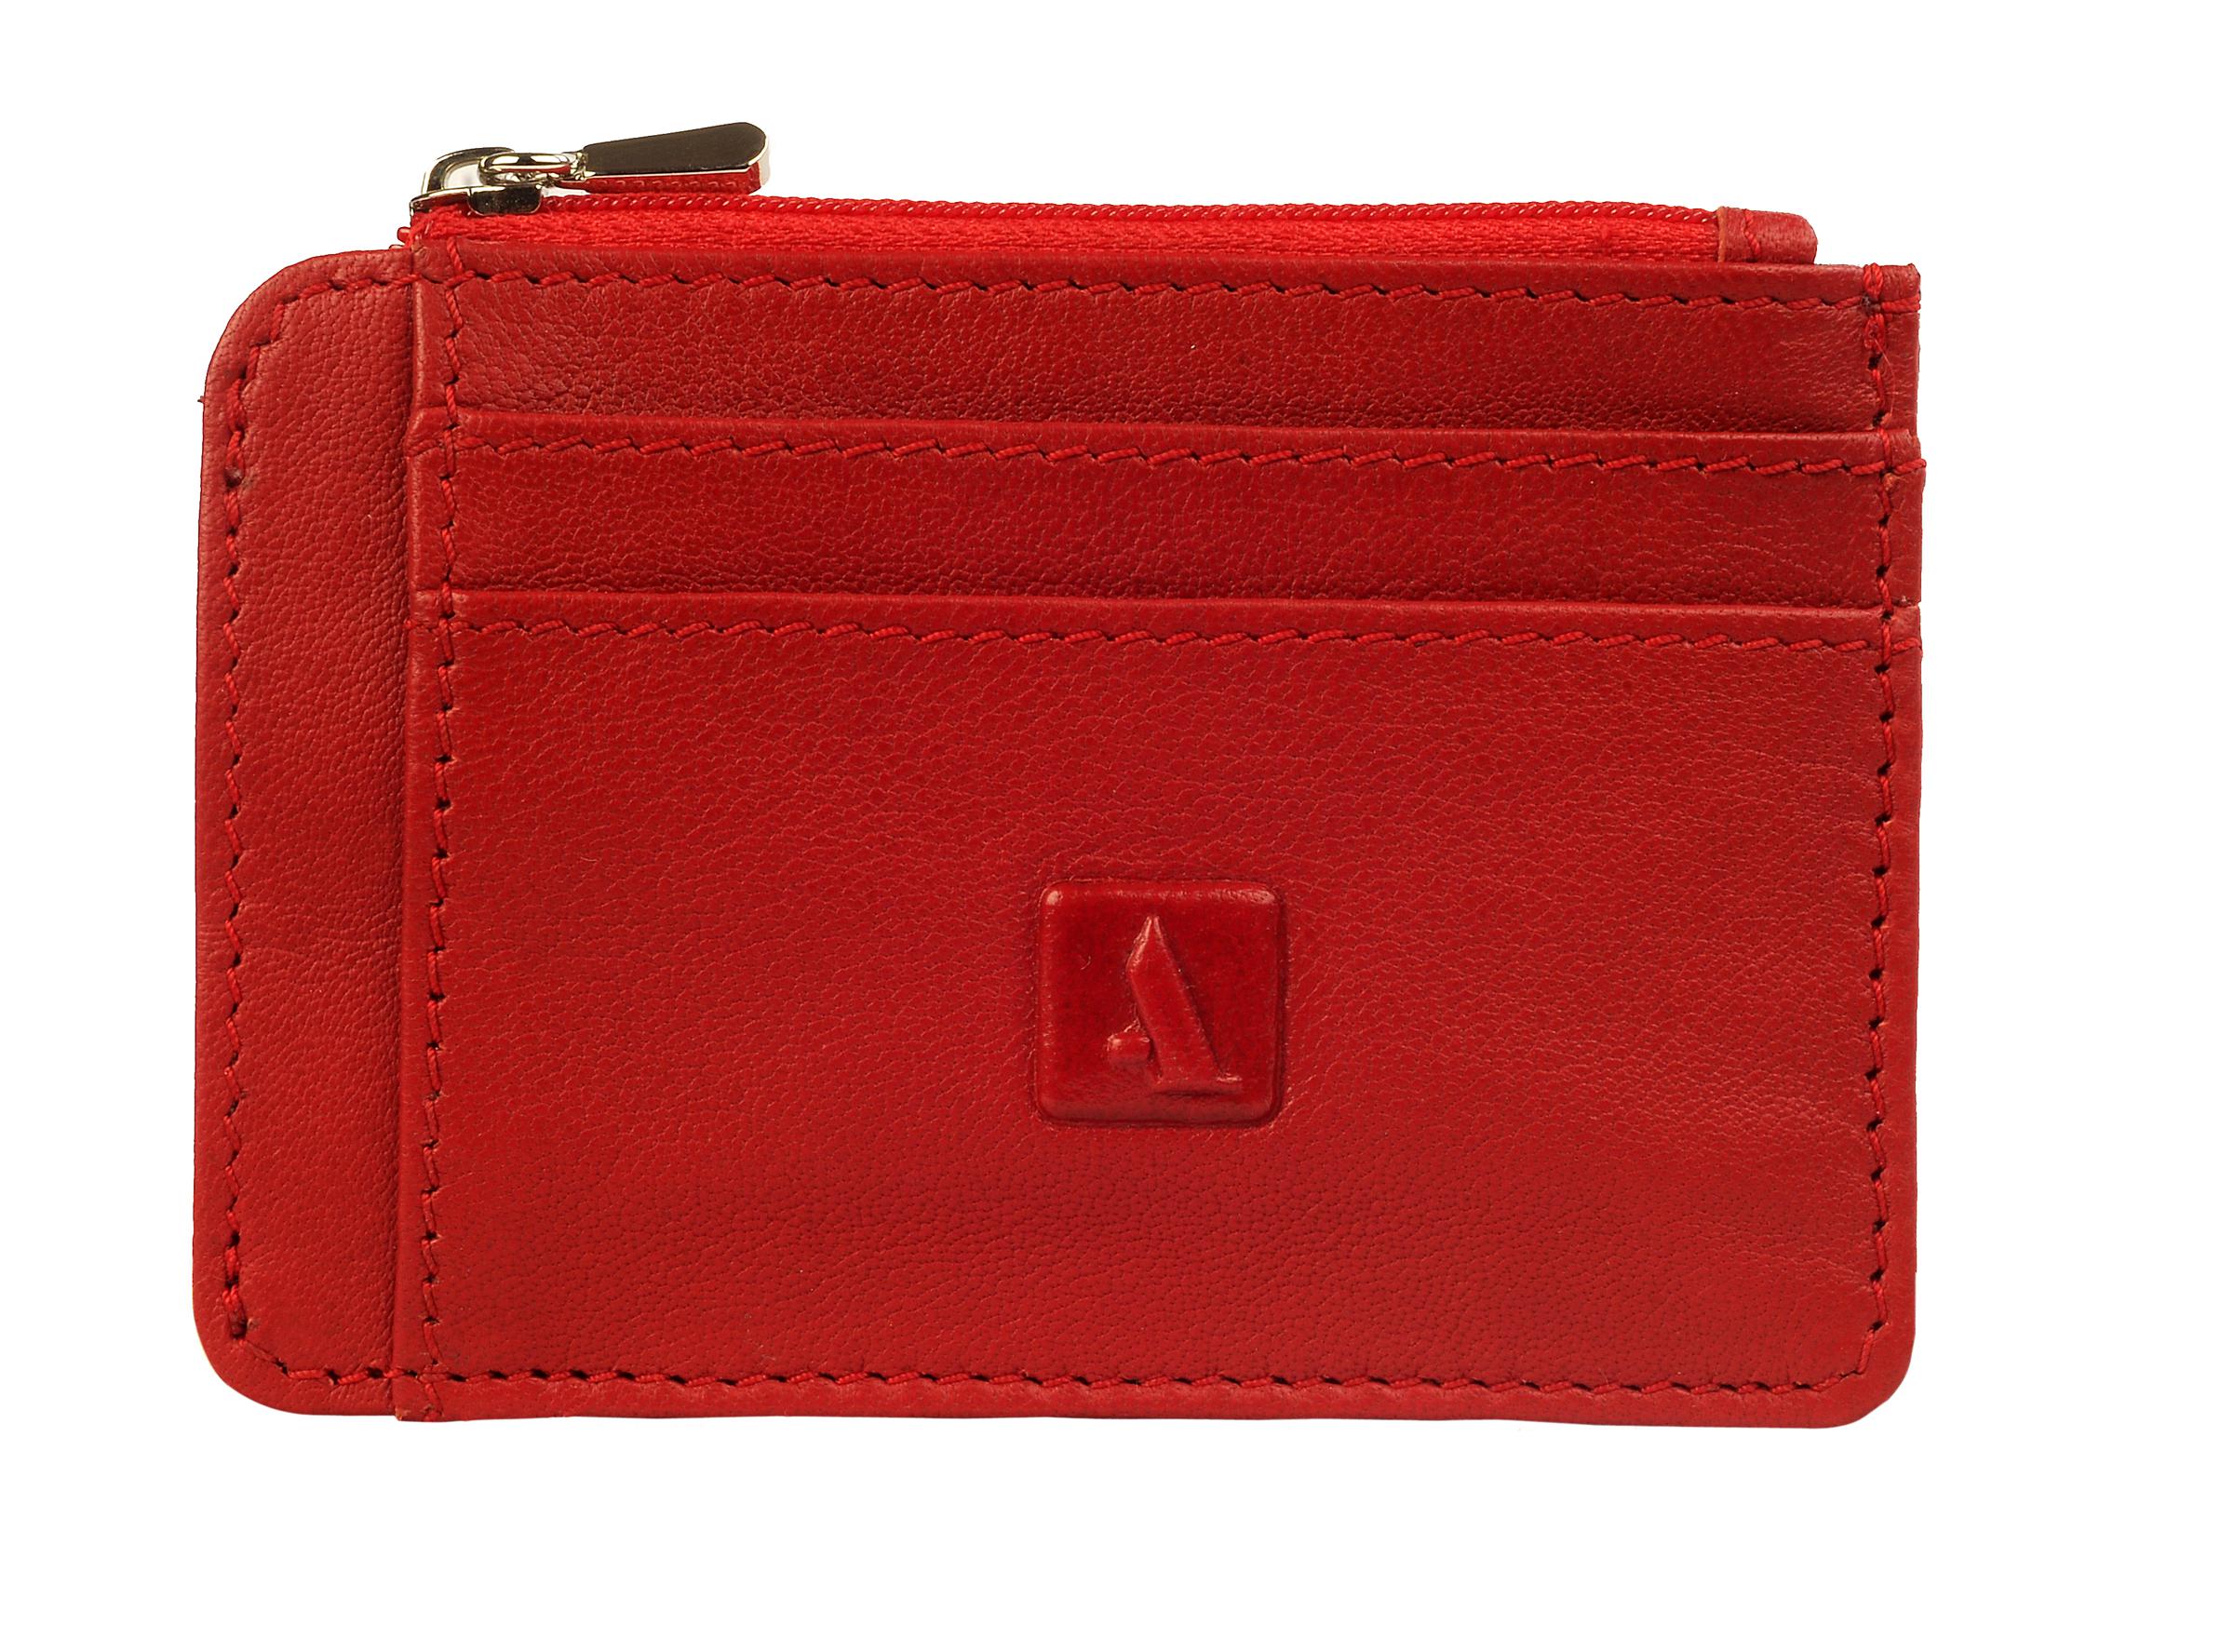 W201--Credit card holder with photo id in Genuine Leather - Red